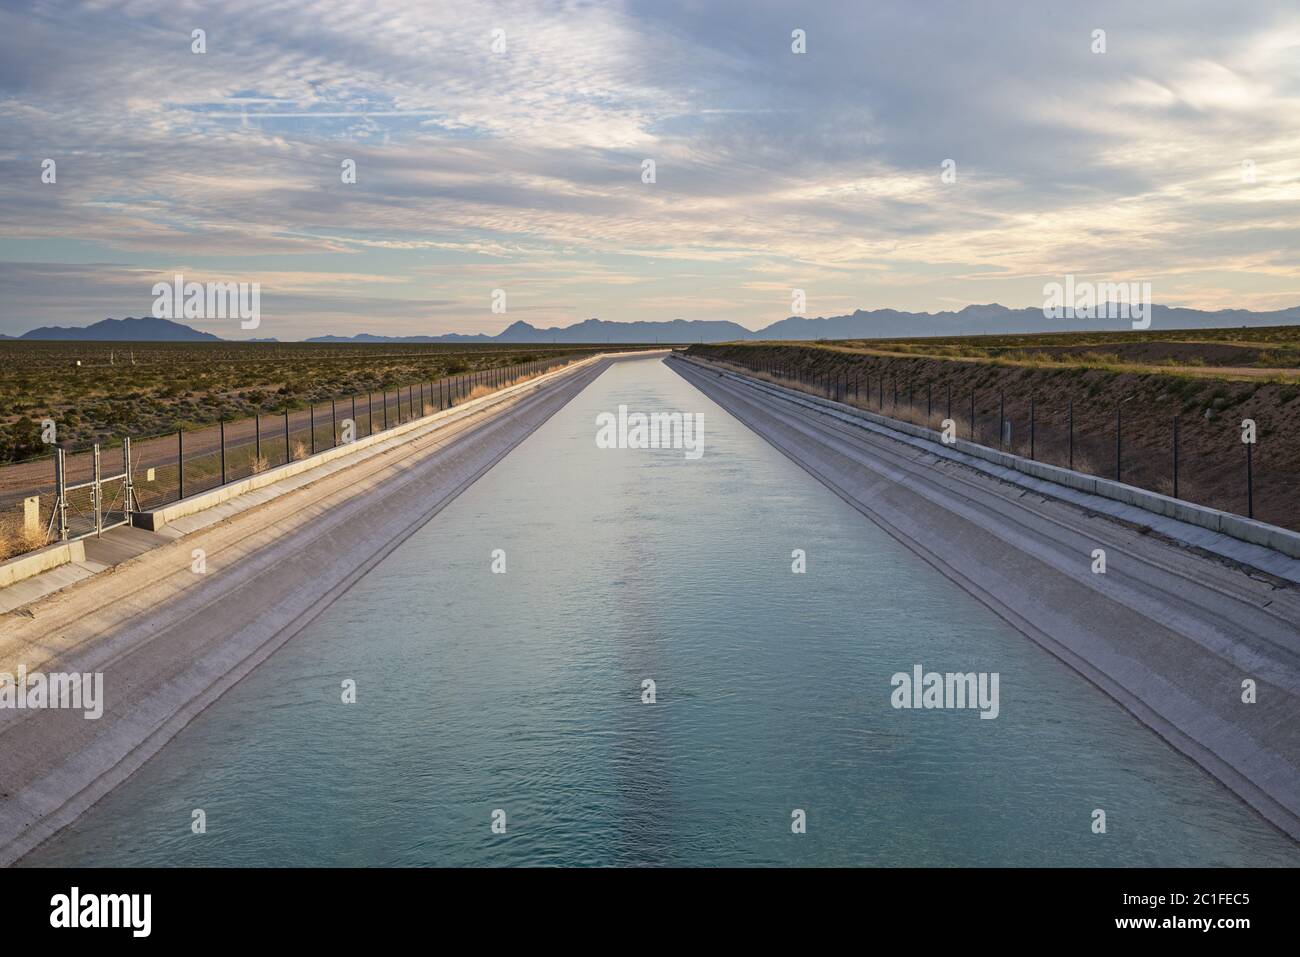 the lined canal of the Colorado River Aqueduct transports water across the Mojave Desert towards Los Angeles Stock Photo